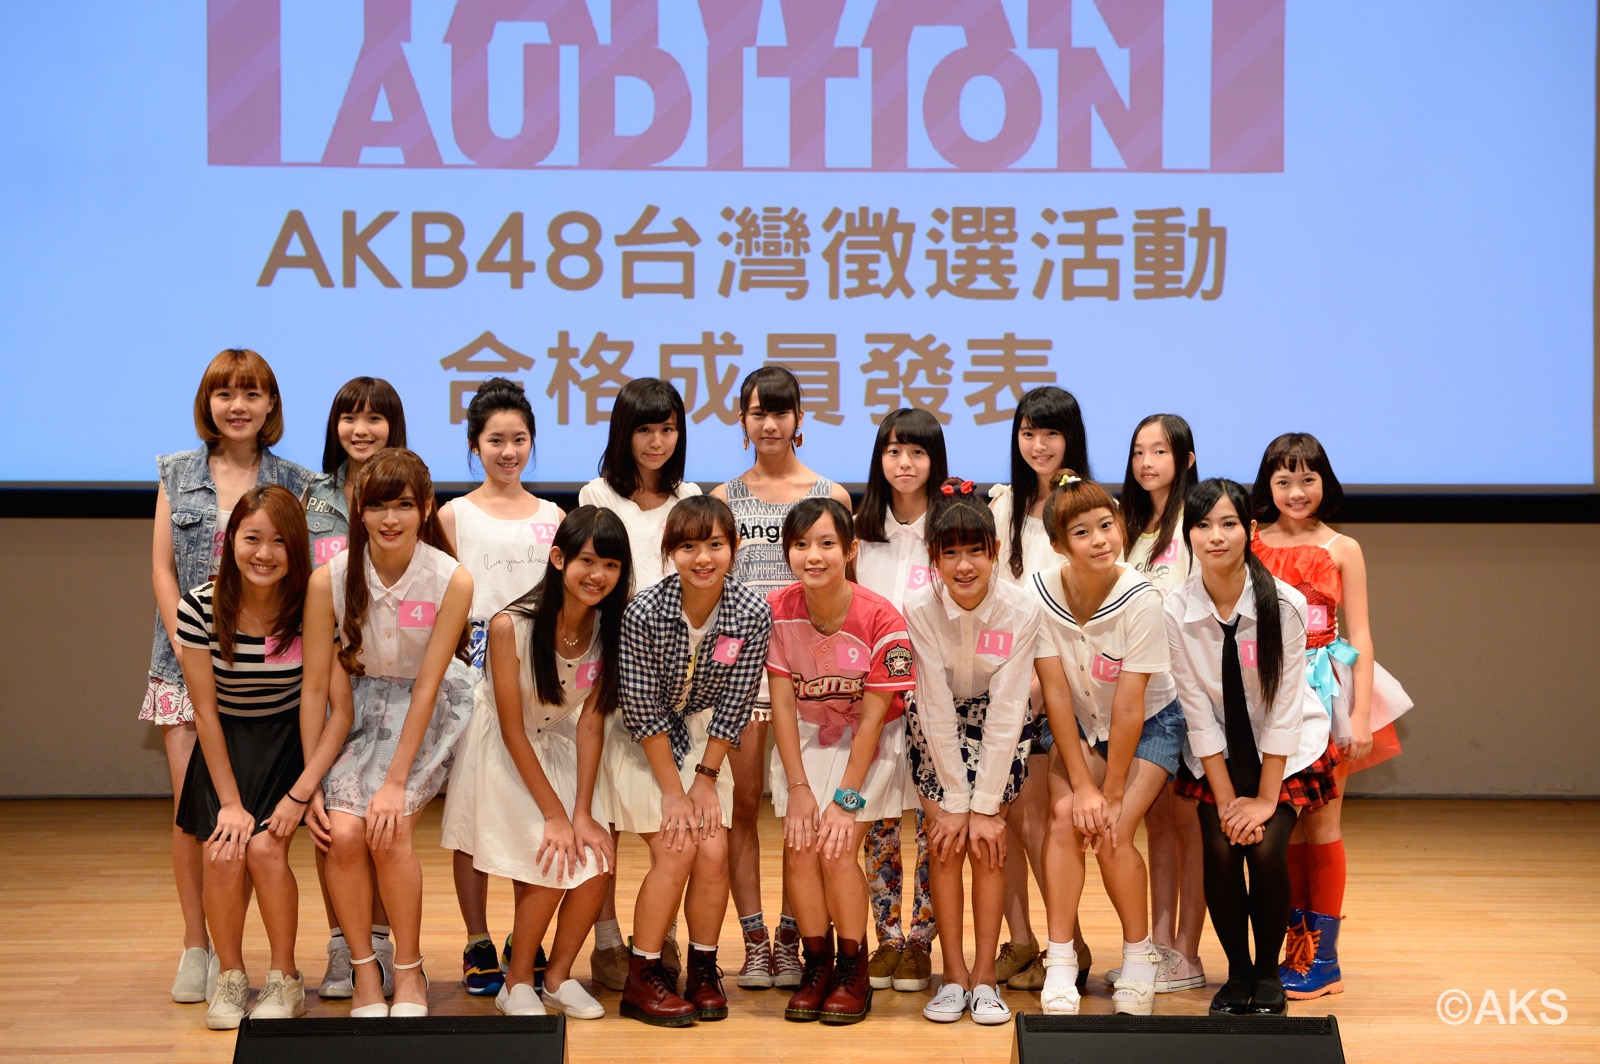 17 Girls in Taipei are Selected as Gemstones in the Crown of AKB48!